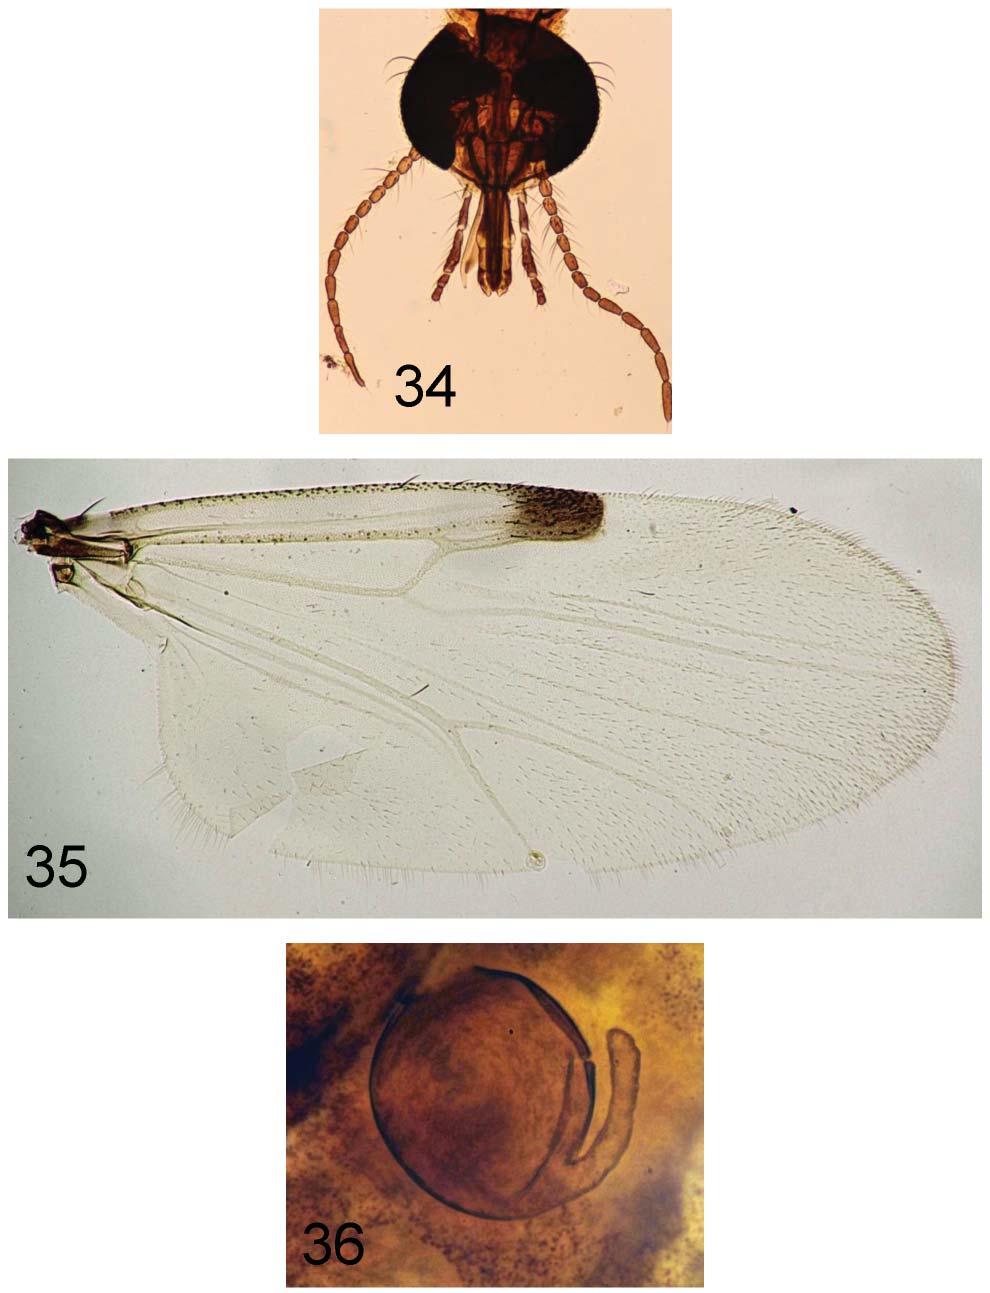 24 INSECTA MUNDI 0441, August 2015 GROGAN AND LYSYK Figures 34 36.